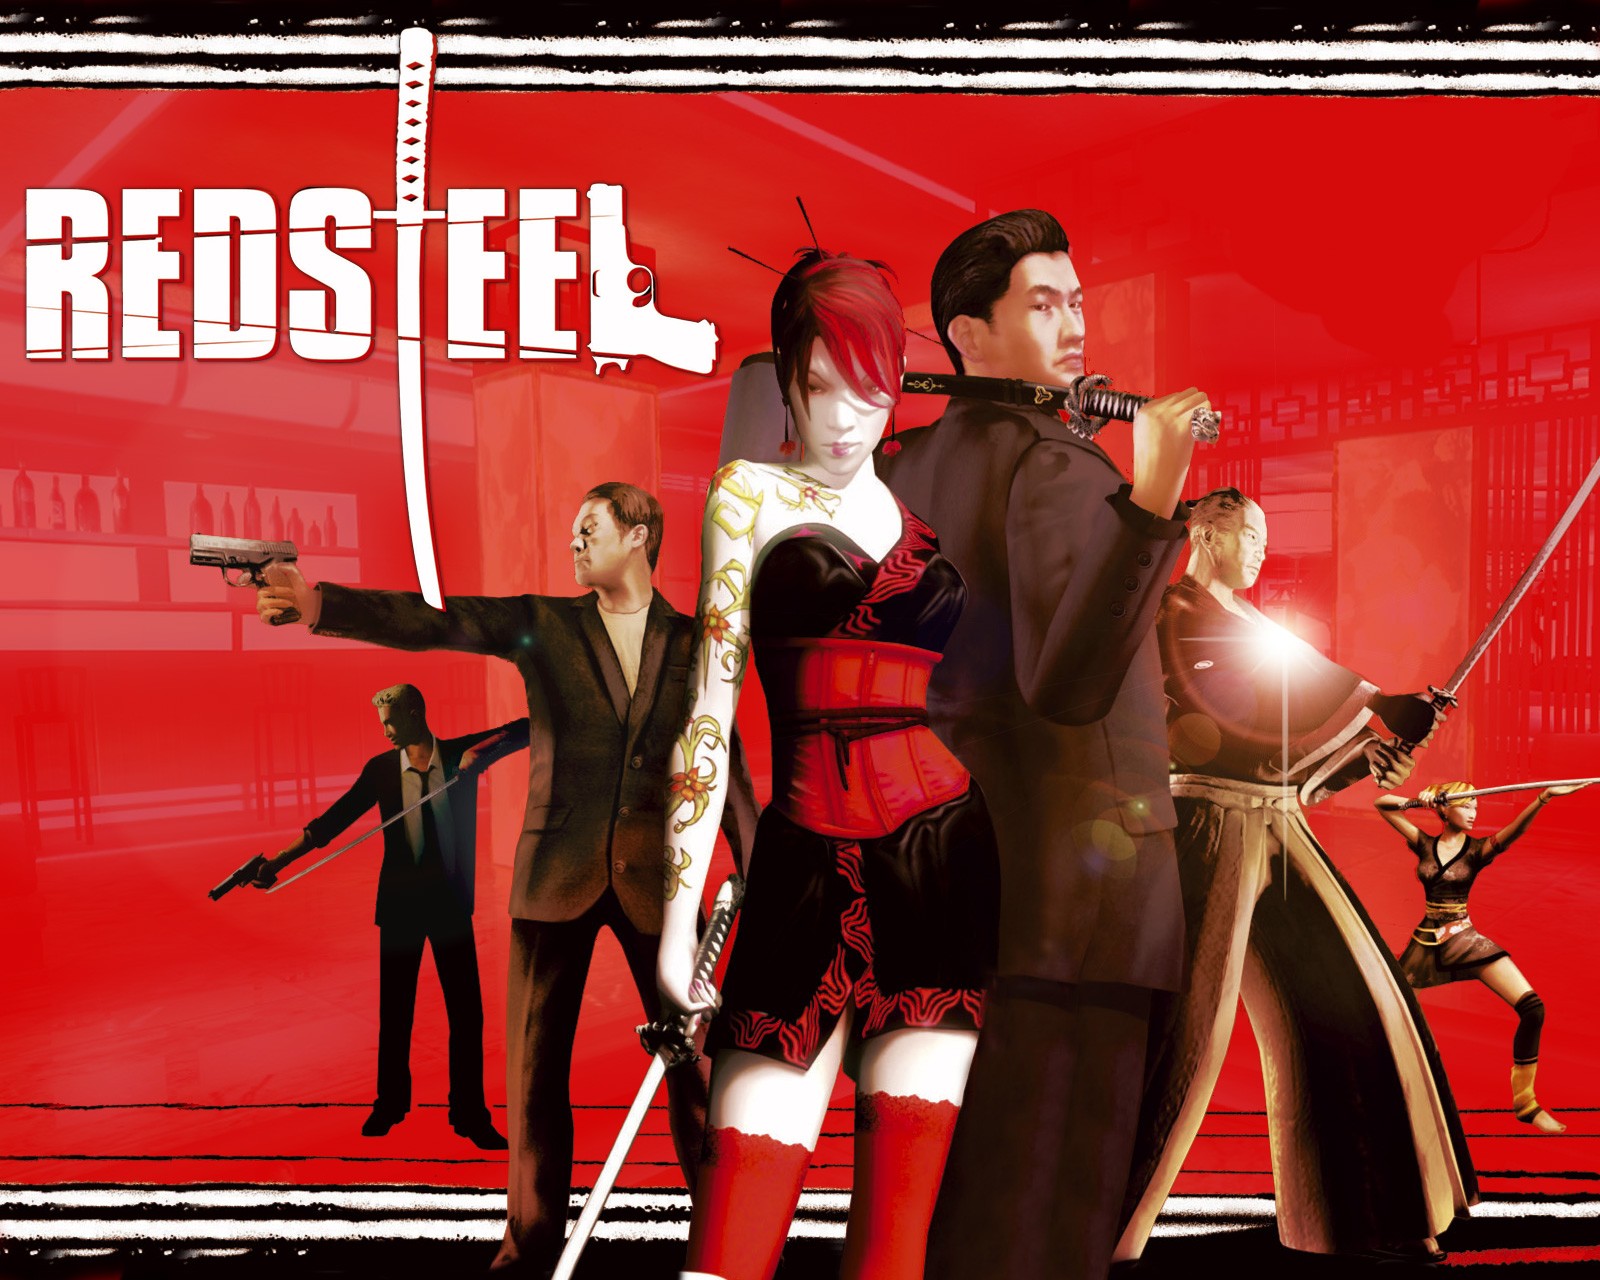 Red Steel screenshots, images pictures - Giant Bomb